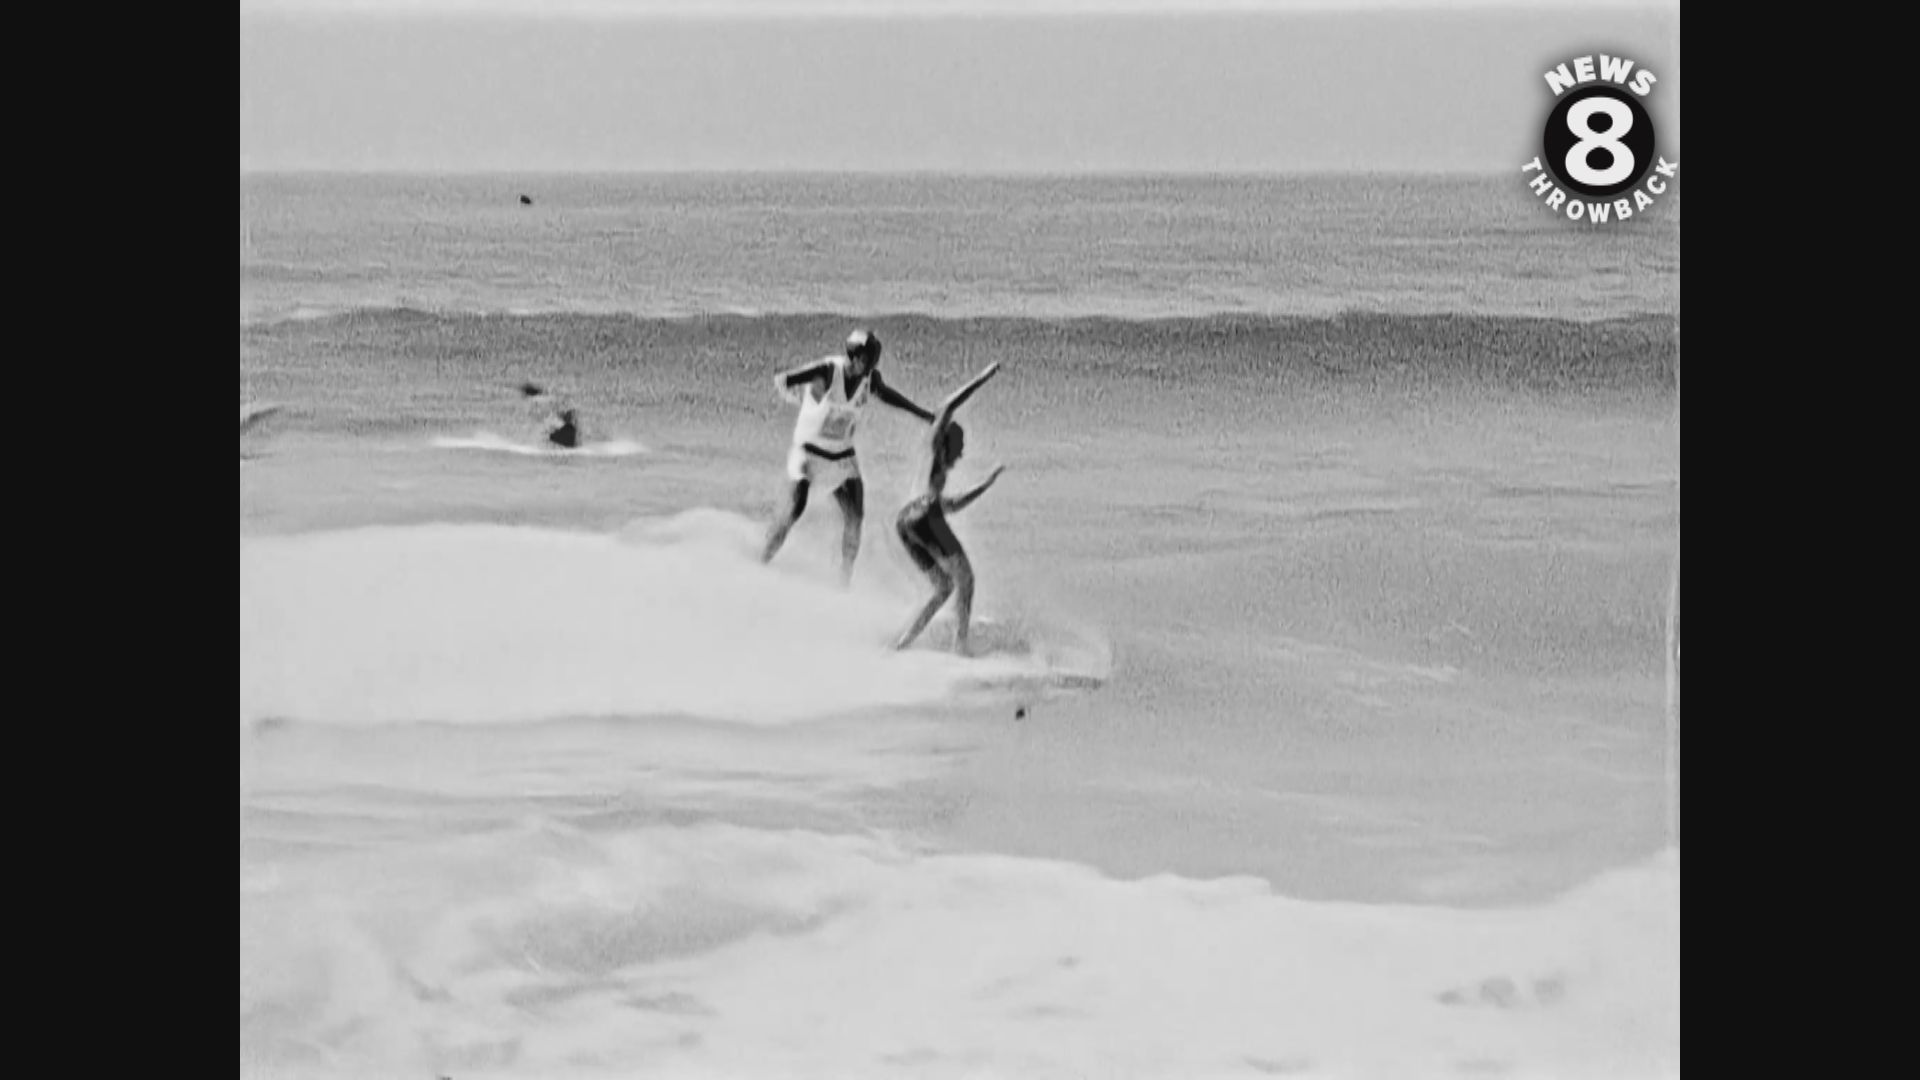 September 19, 1966
At the Oceanside Annual Invitational Surfing Contests yesterday Corky Carroll of Dana Point took double honors—he won the men’s title.